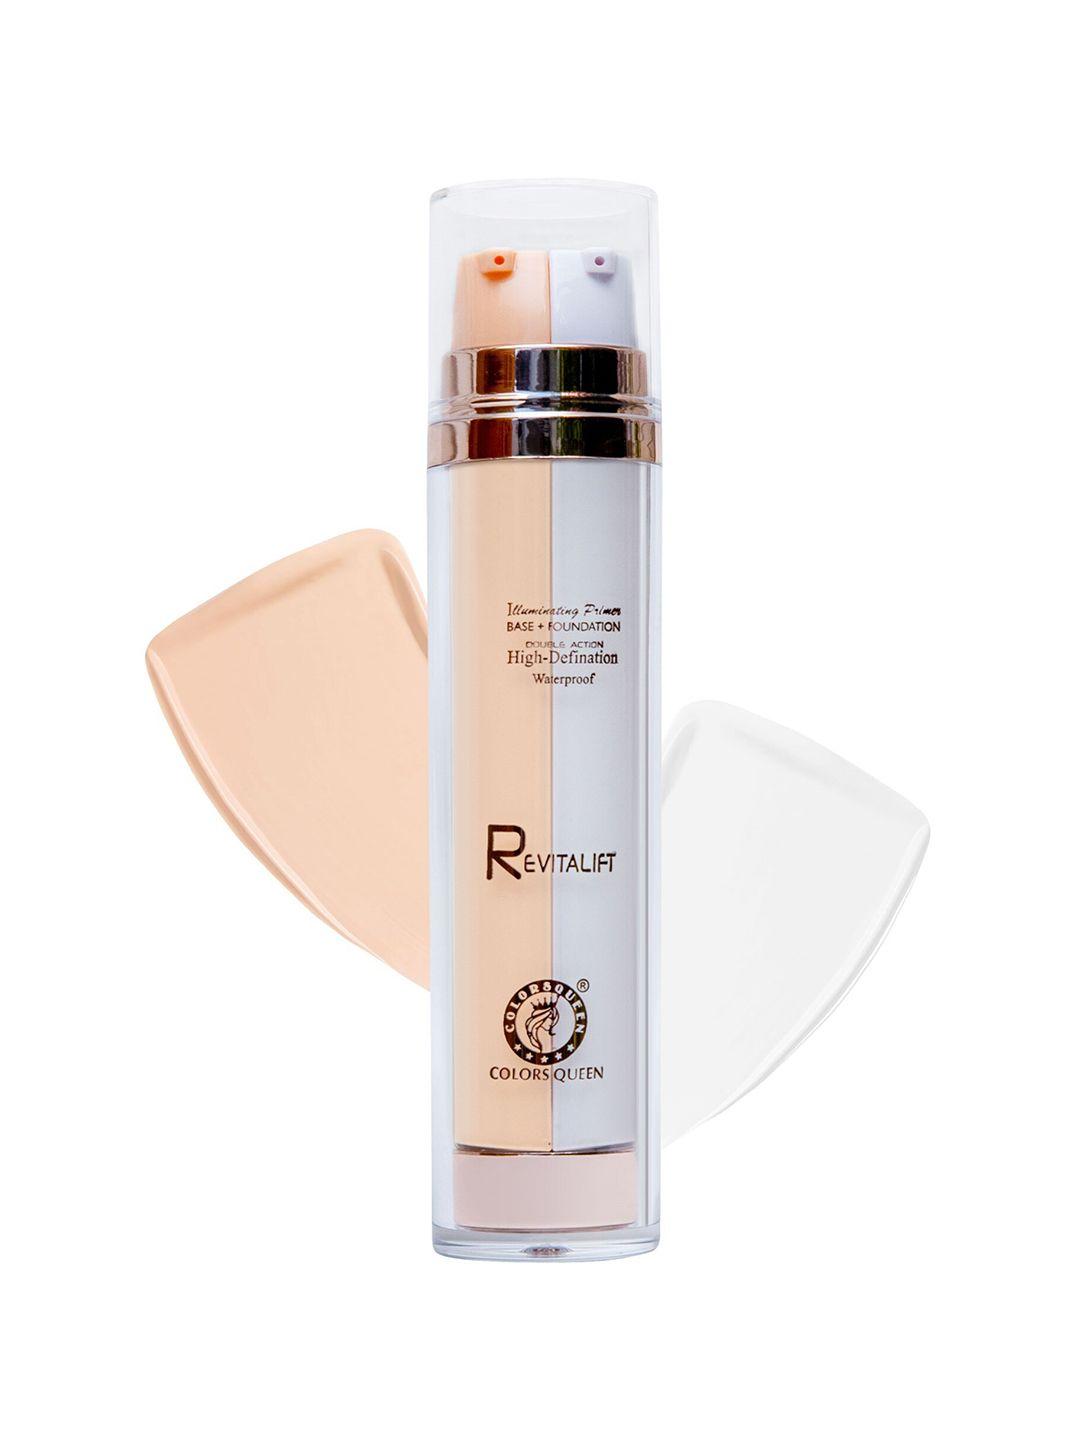 colors queen revitalift 2 in 1 illuminating base primer + foundation 40 g - ivory 02